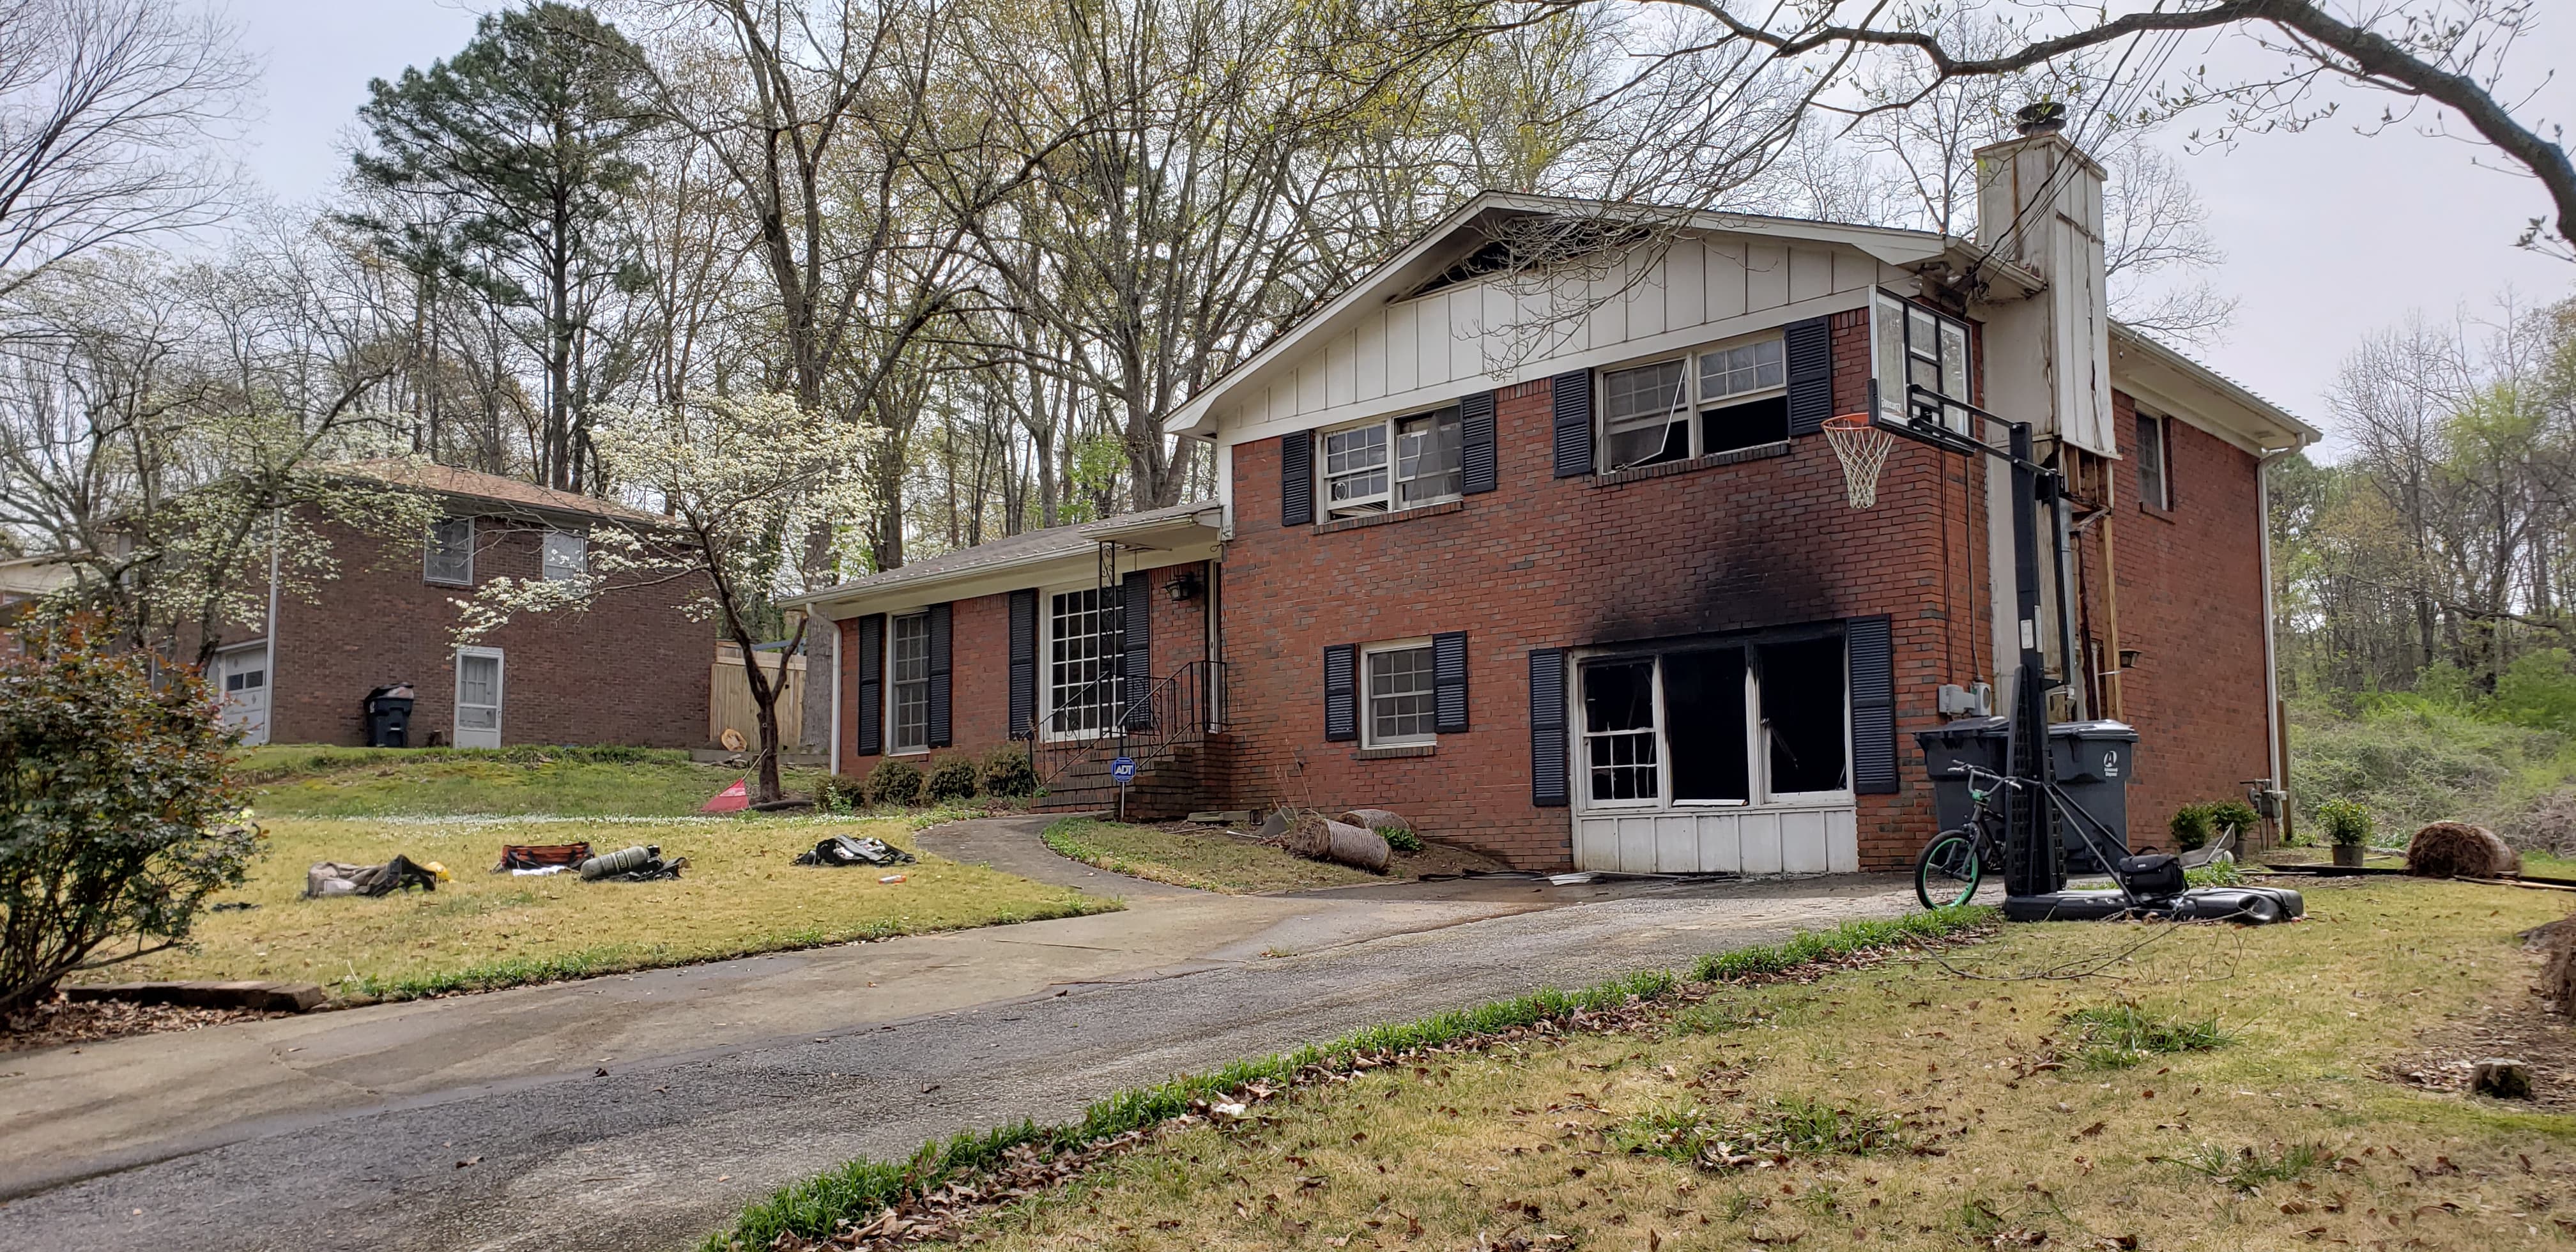 Center Point Fire responds to house fire in Parkway Estates